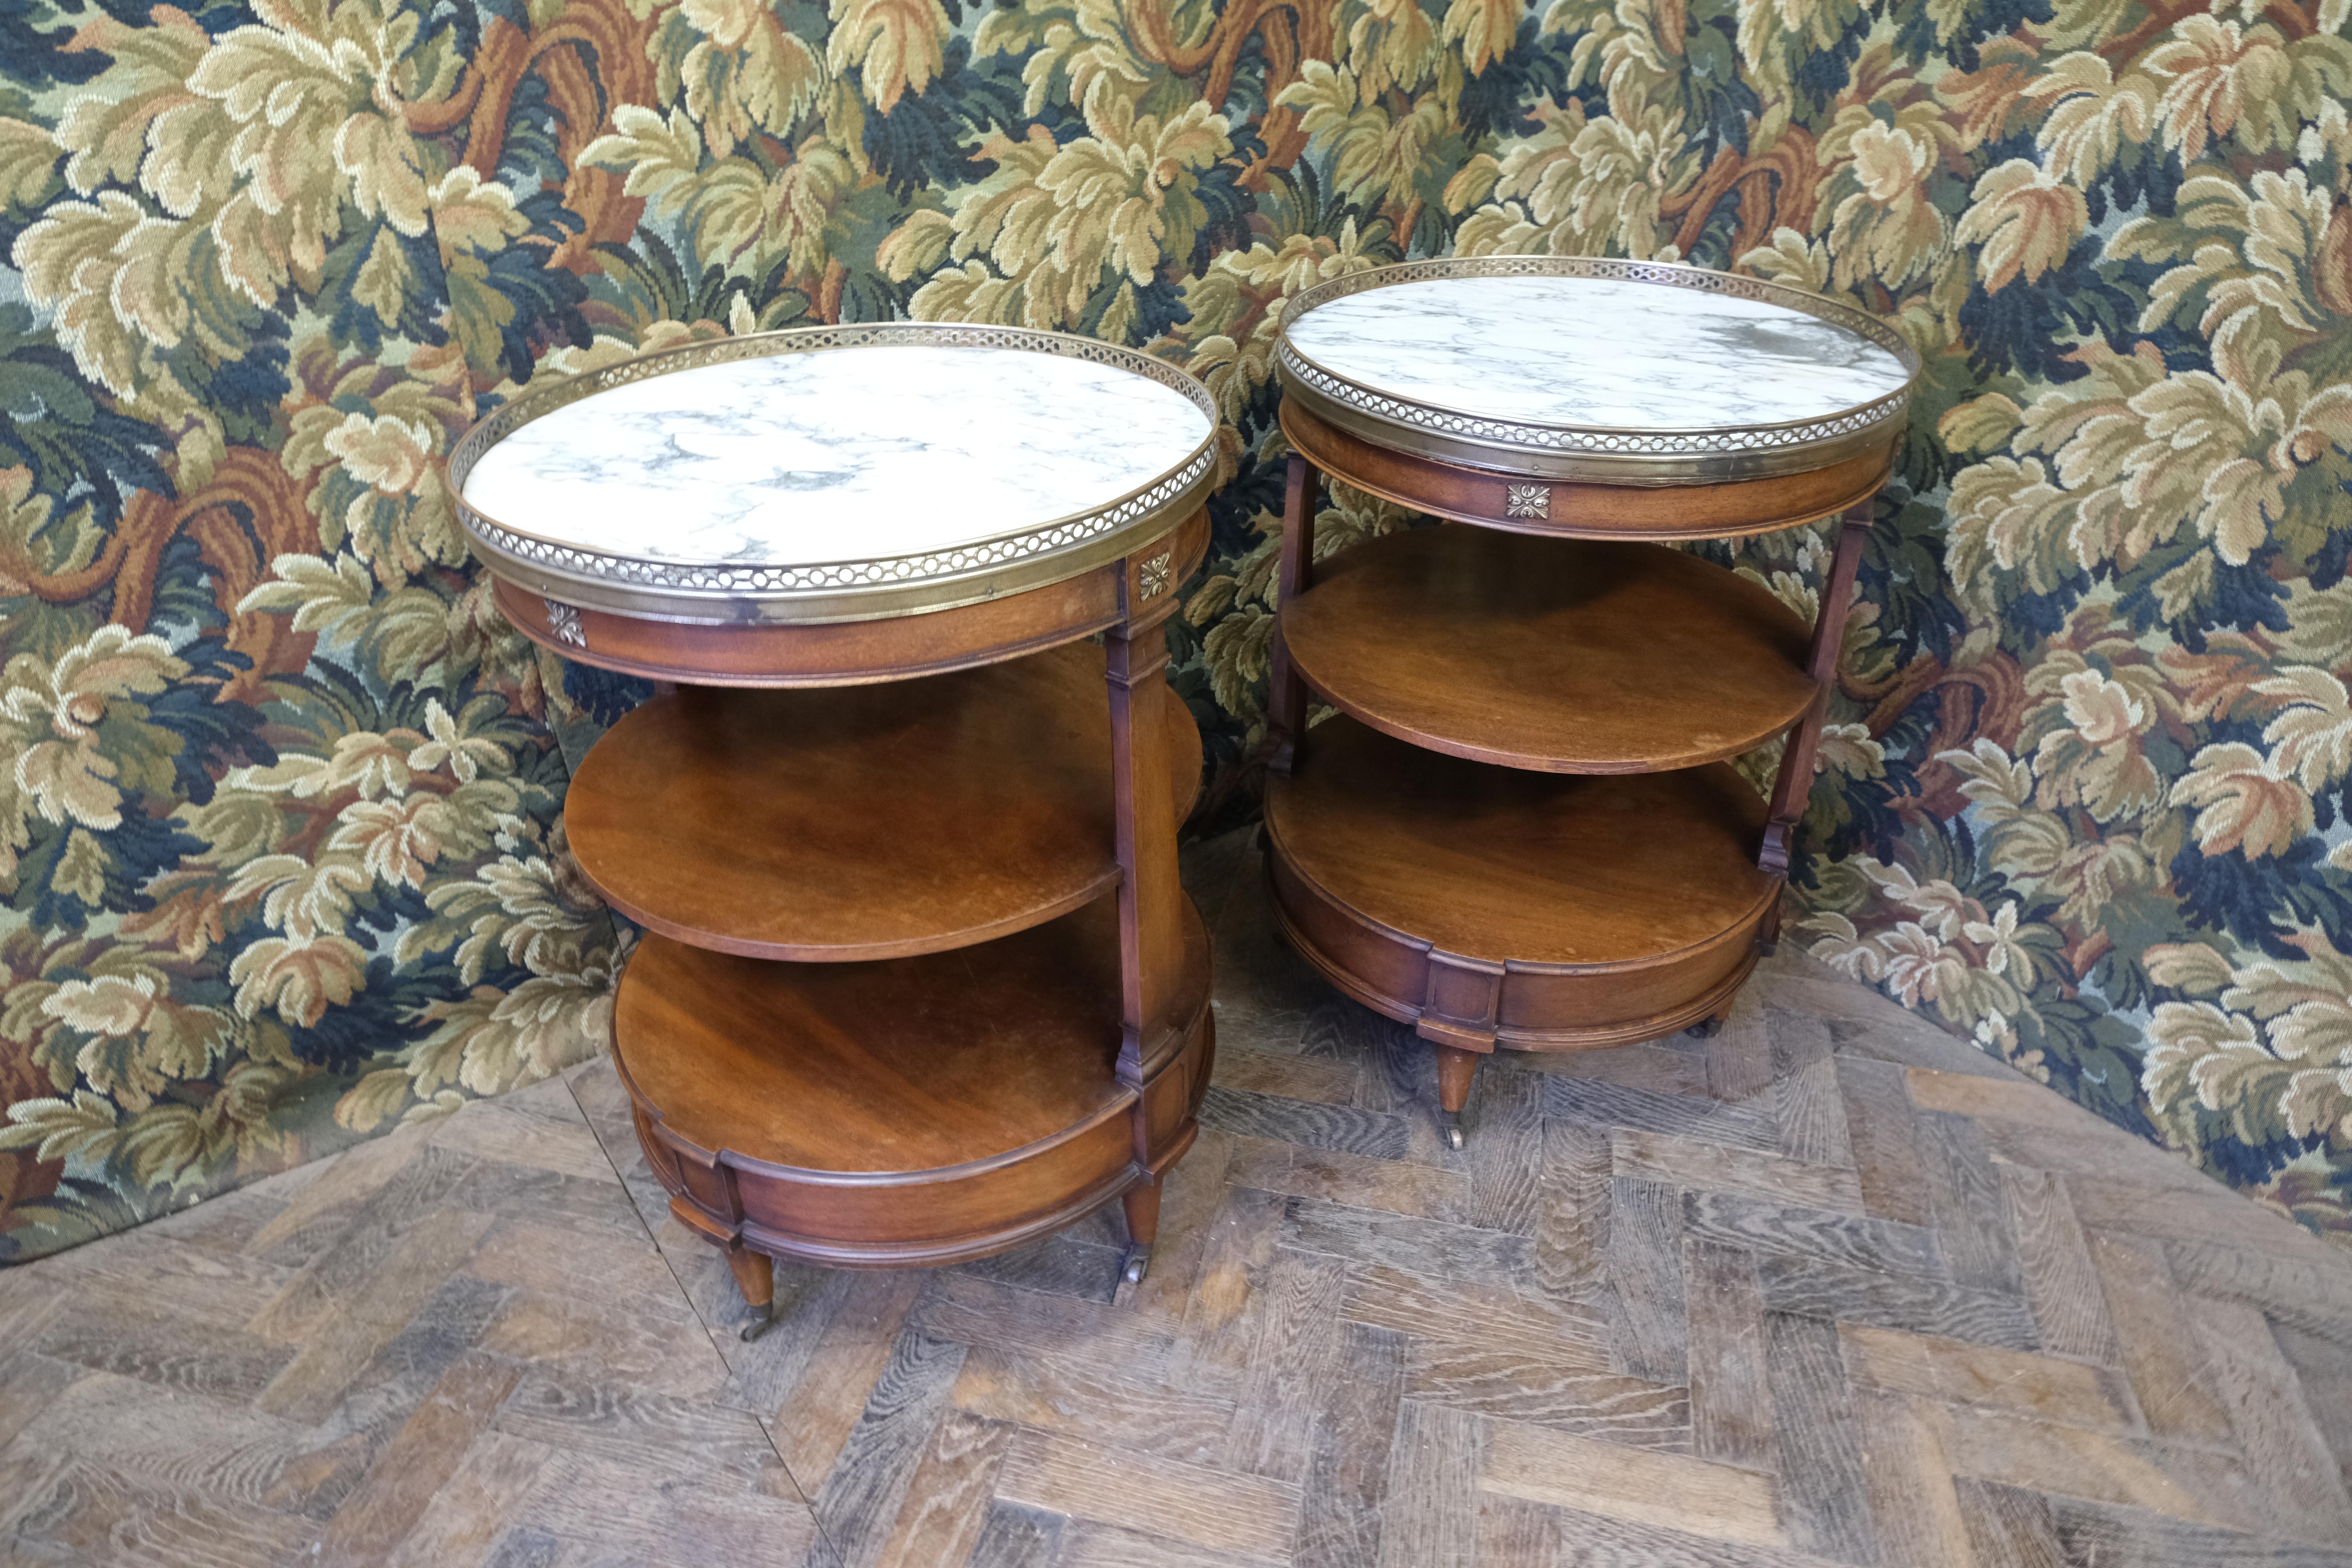 Hutton-Clarke Antiques is delighted to present an exquisite pair of étagère tables, crafted in an elegant French manner by the renowned W. M. Barclay from the United States. These tables are masterfully constructed from rich mahogany, featuring tops